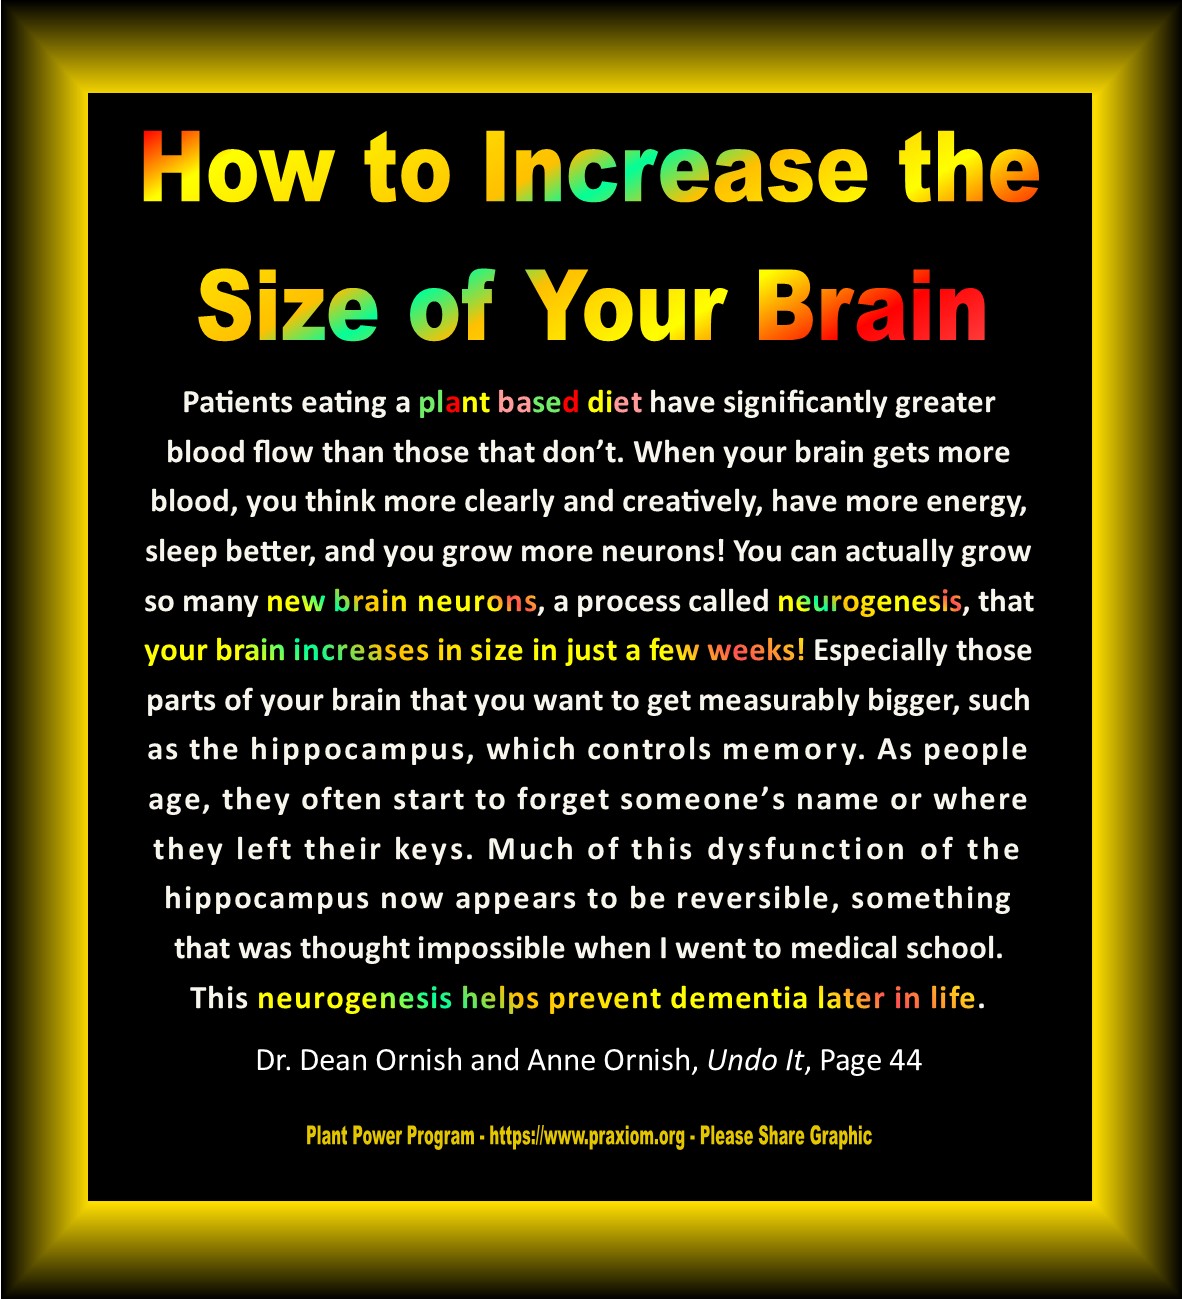 You Can Grow More Brain Cells - Dr. Dean Ornish